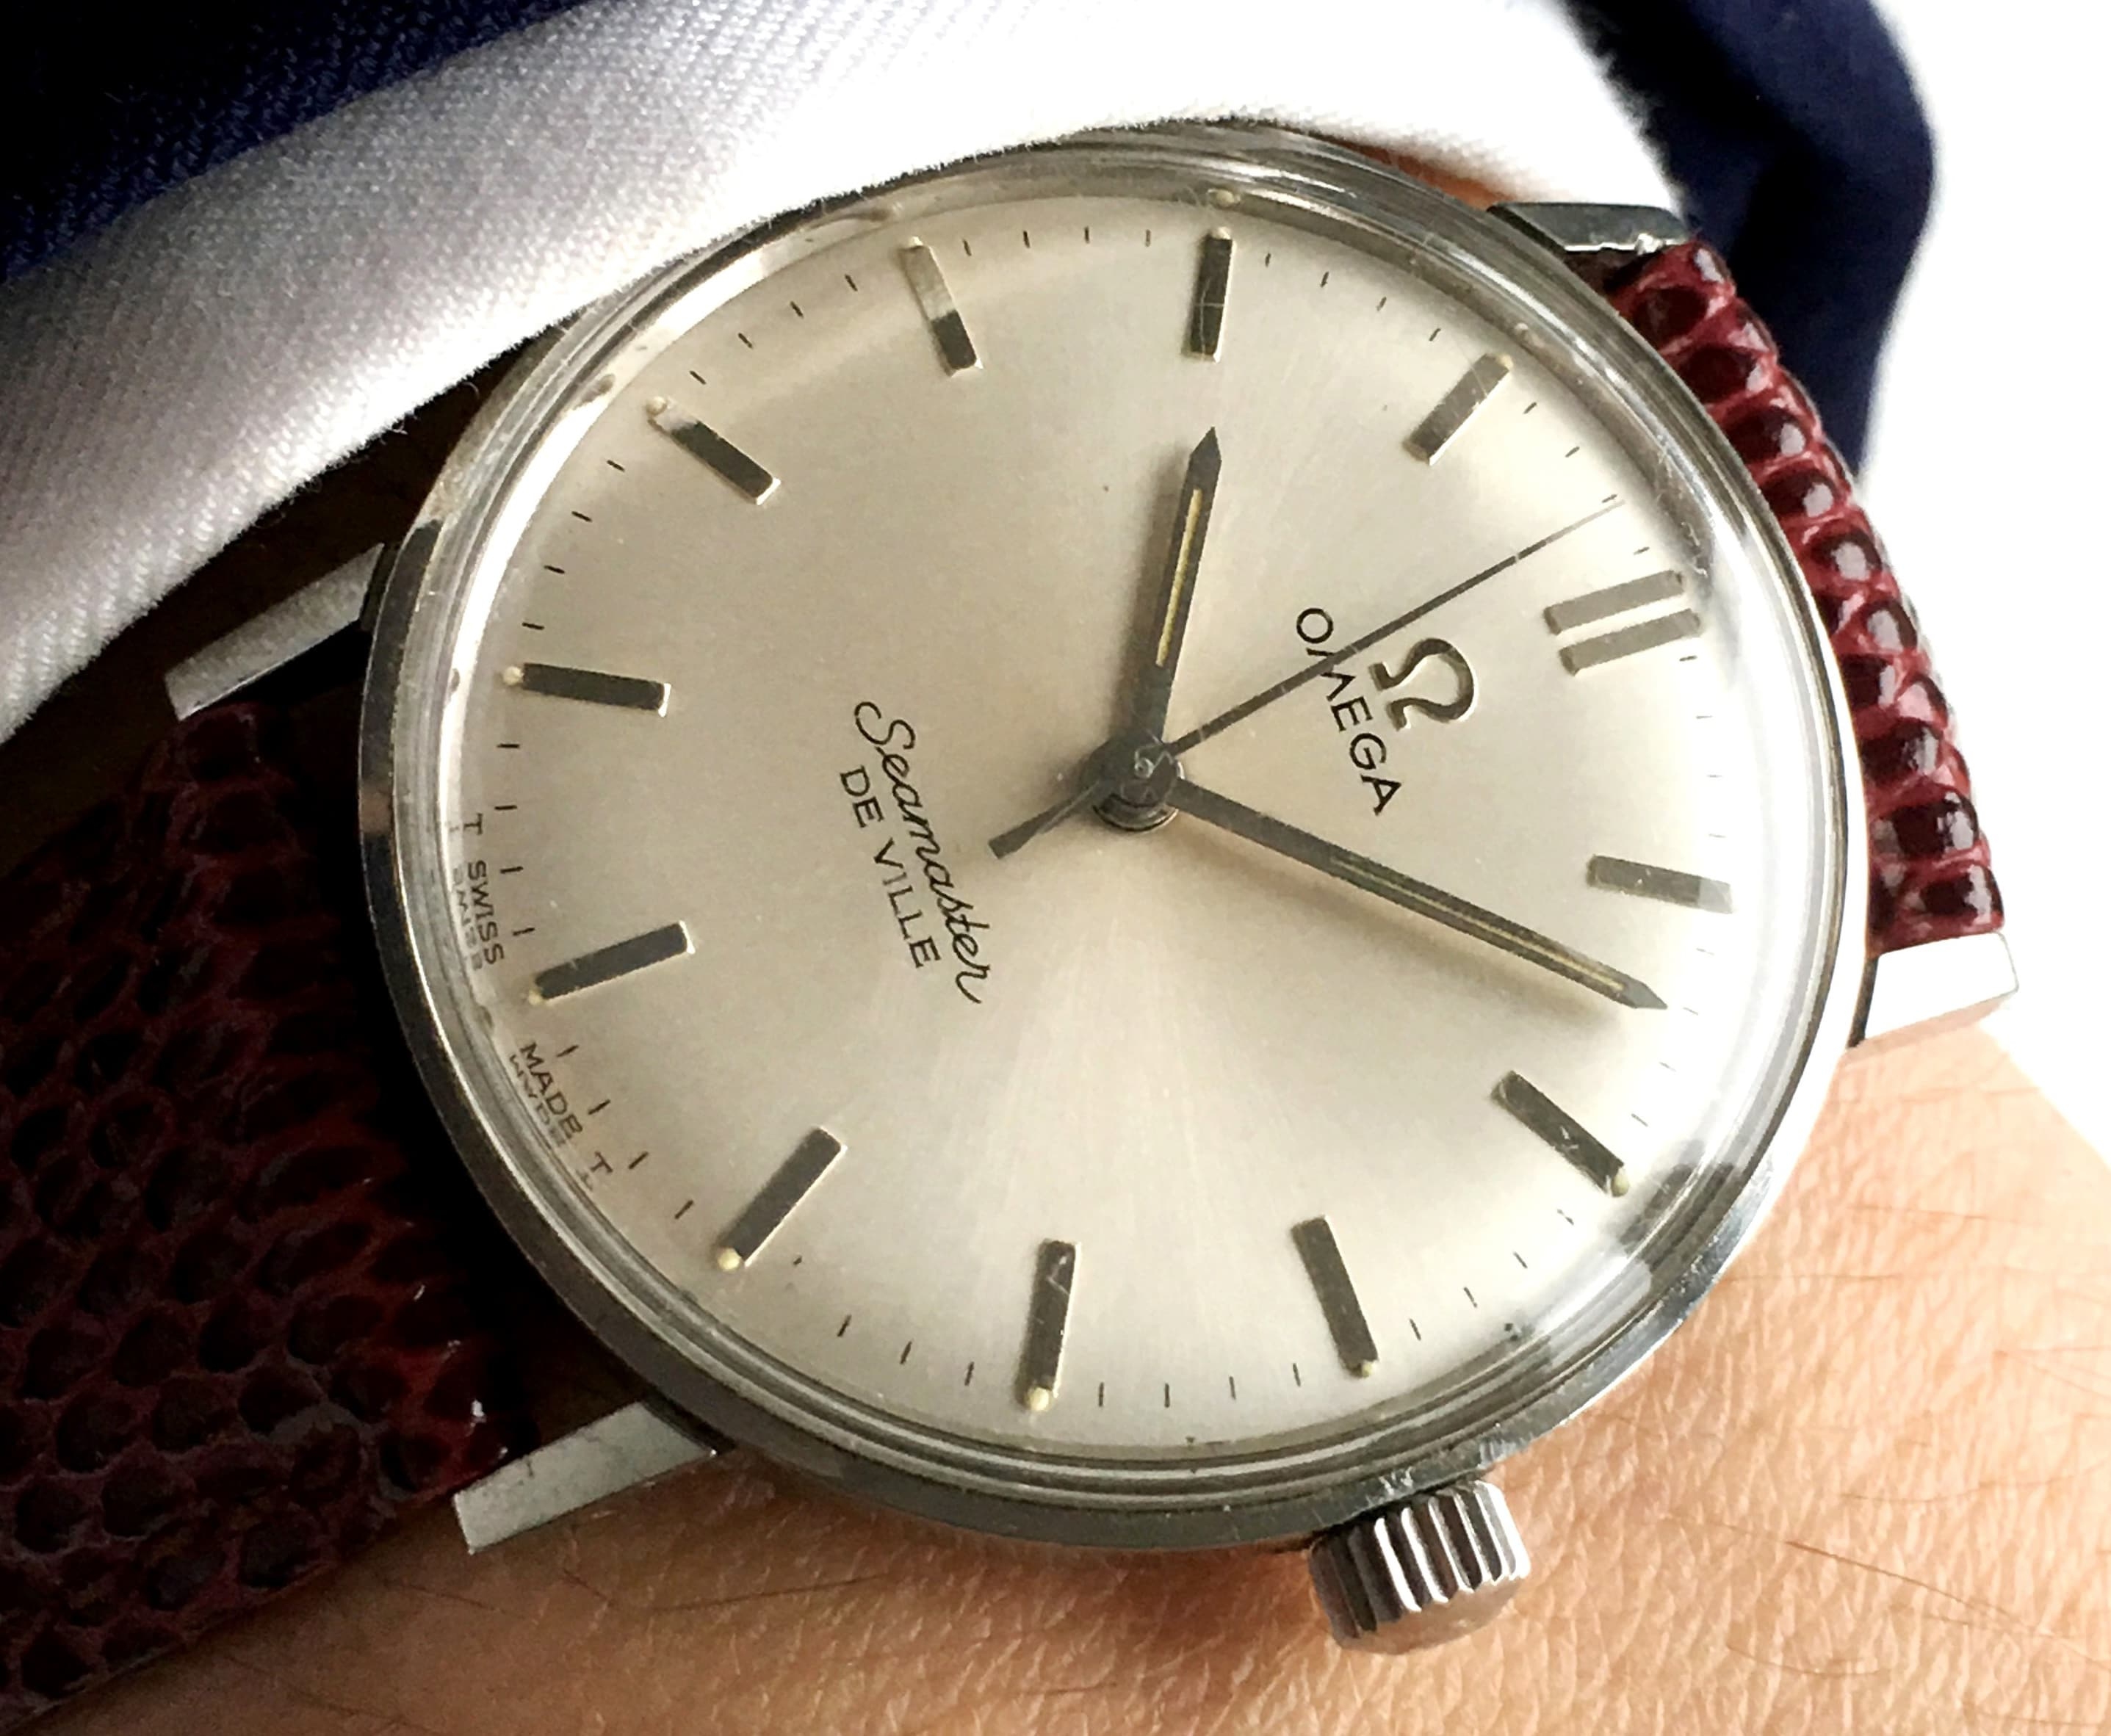 5 affordable vintage watch options